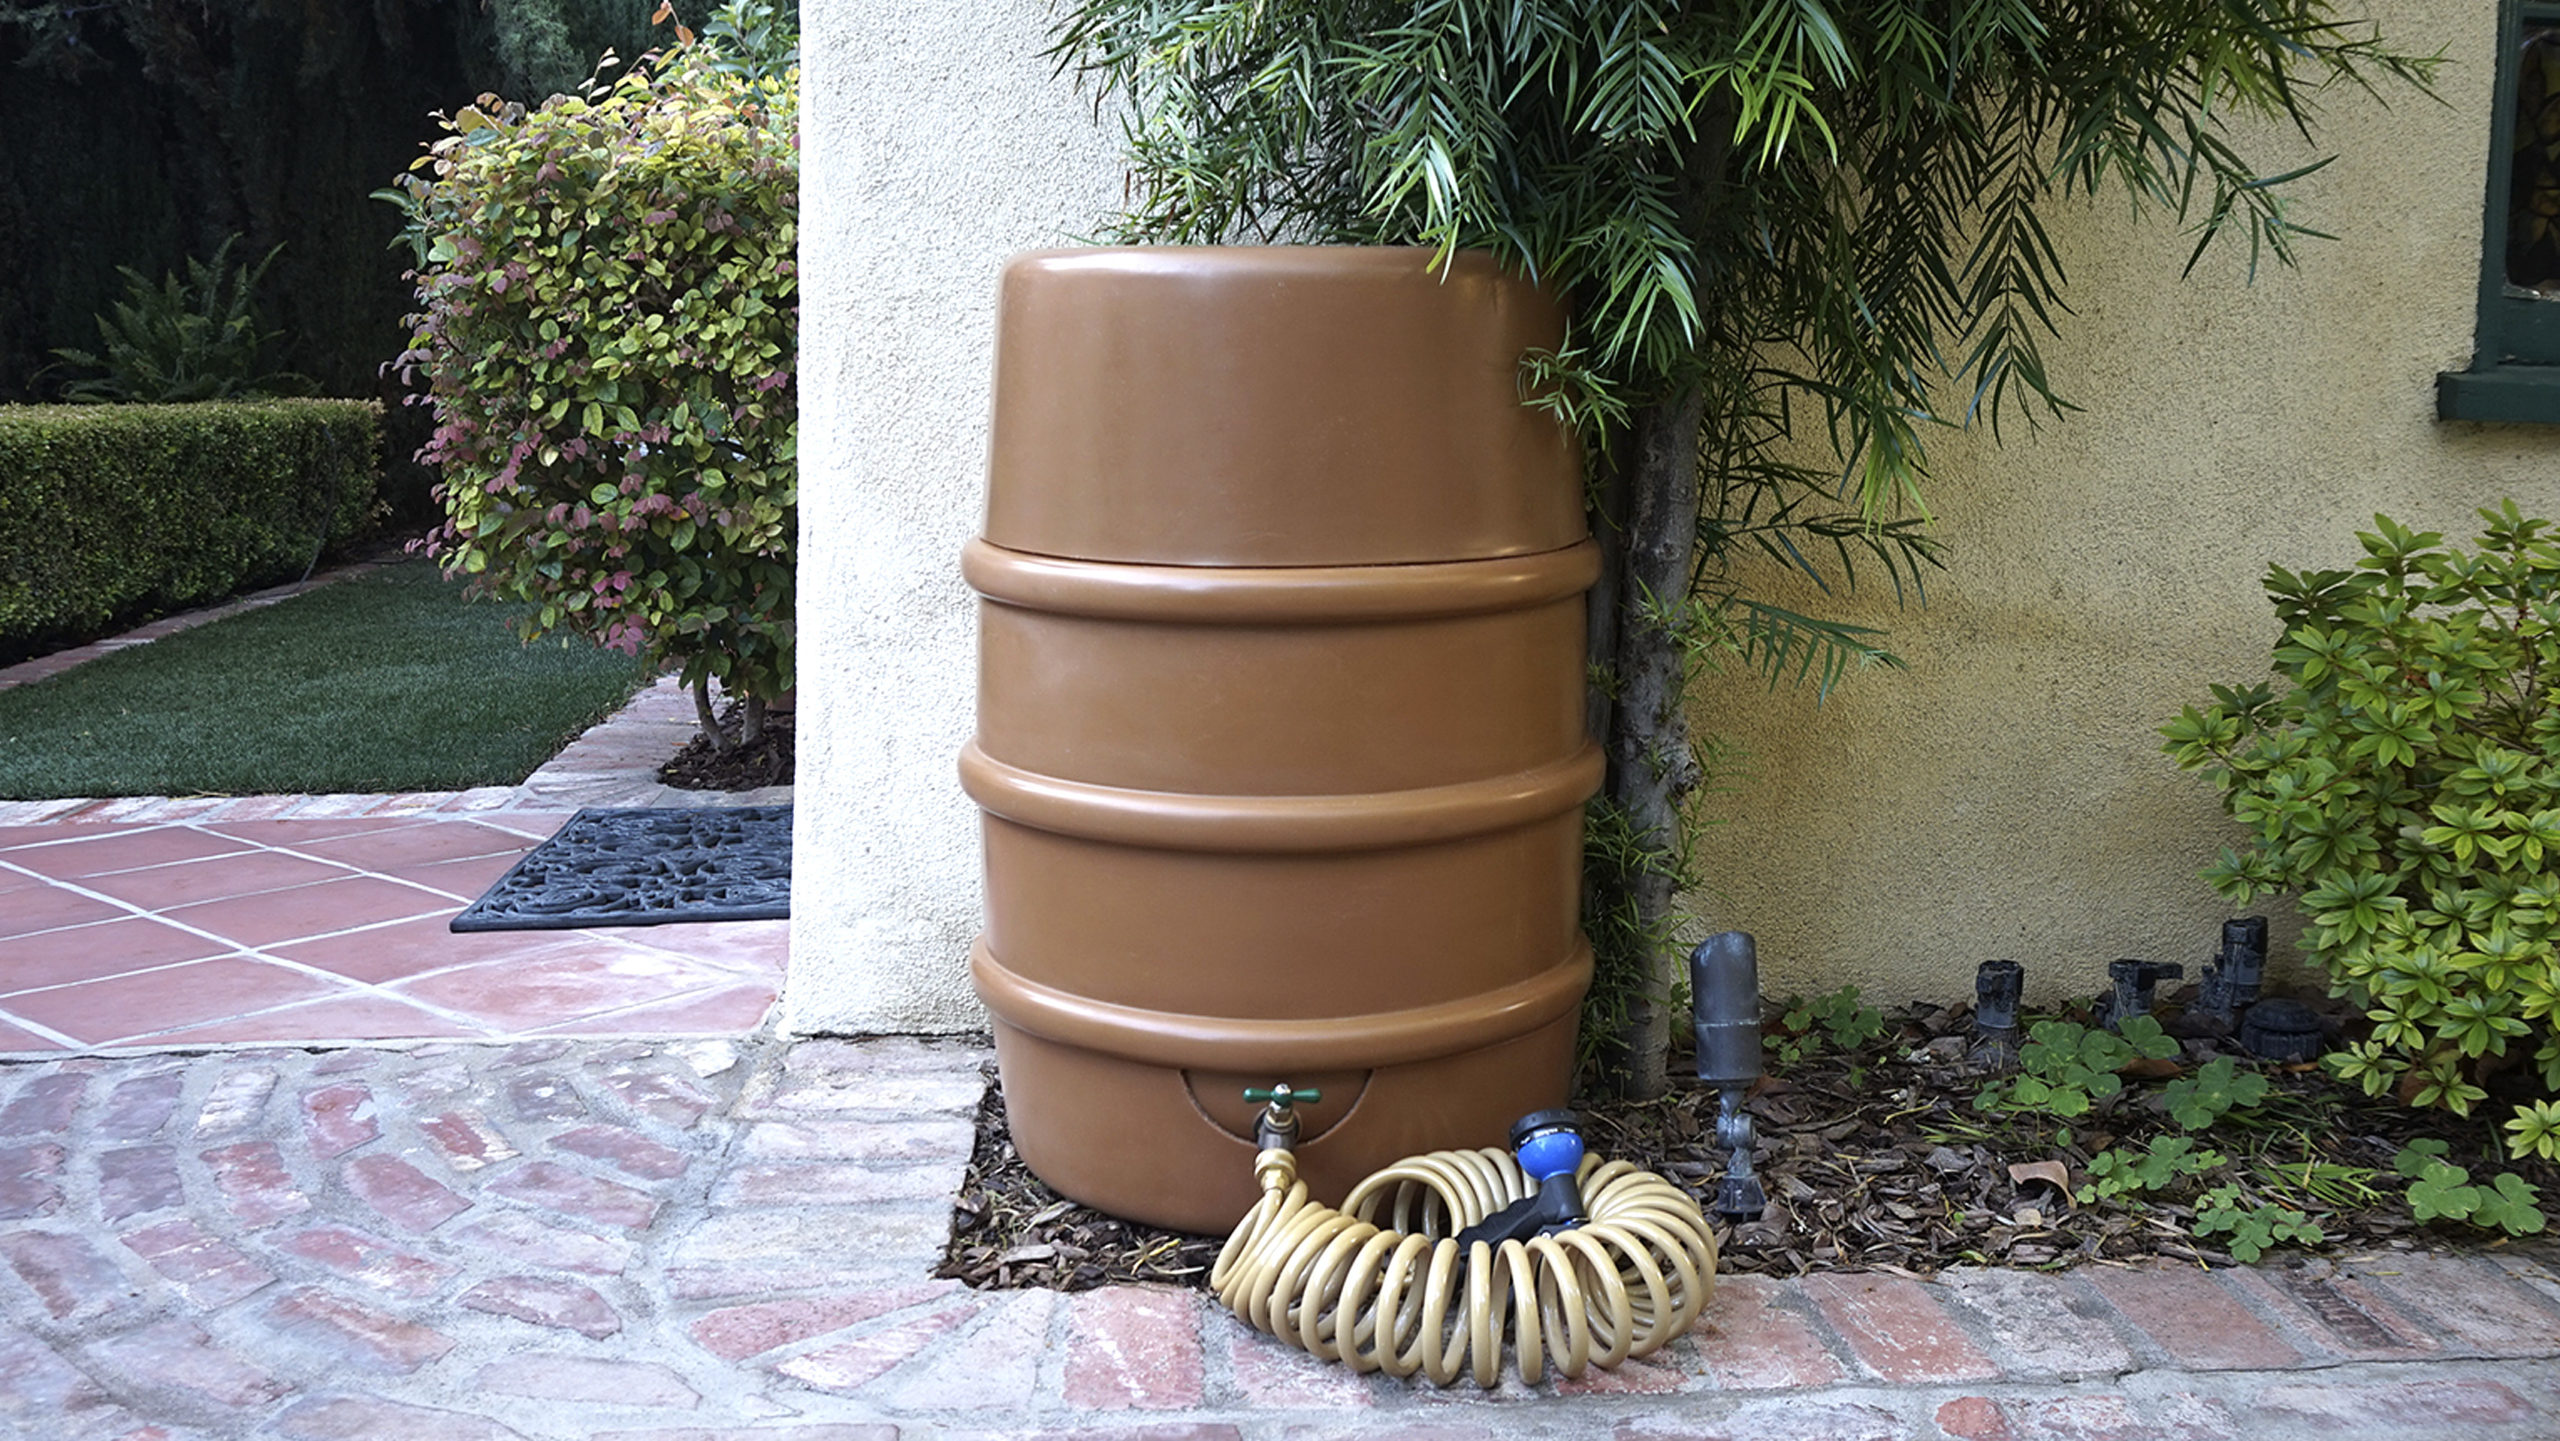 Barrel is Perfect for Water Emergency Preparedness